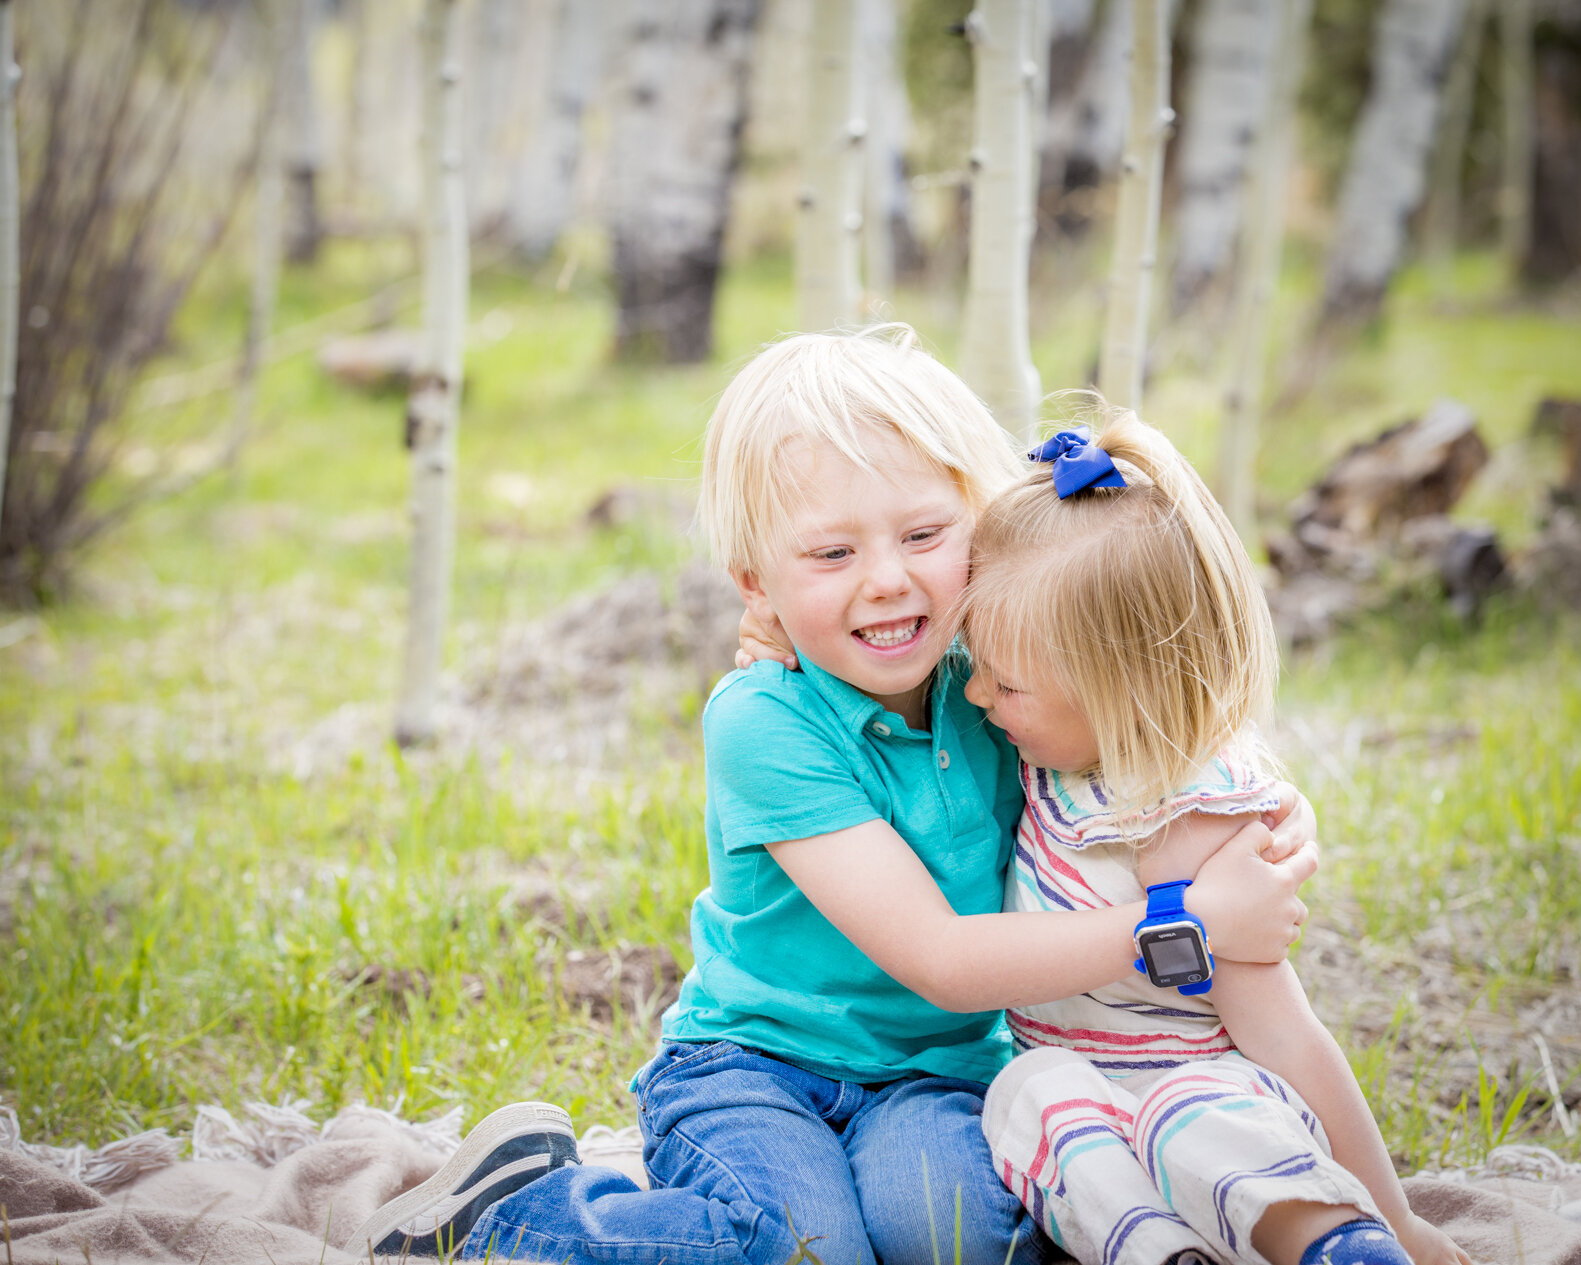 Colorado-Portrait-Family-Photography-Crested-Butte-Wedding-Photographer-2-4.jpg